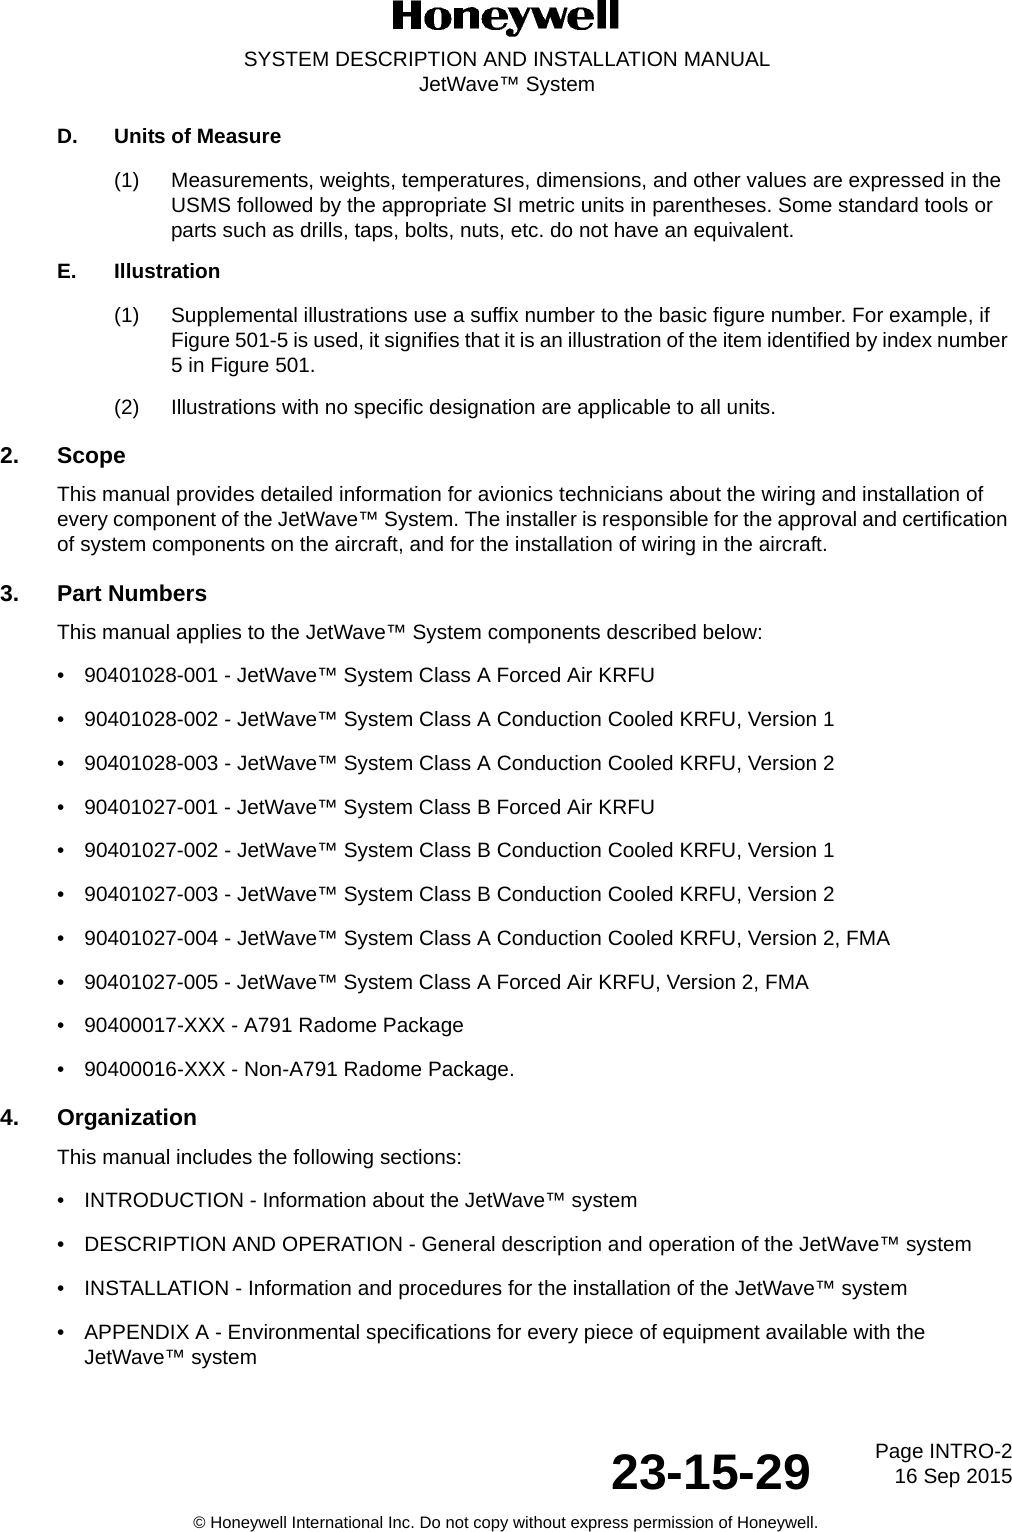 Page INTRO-216 Sep 201523-15-29SYSTEM DESCRIPTION AND INSTALLATION MANUALJetWave™ System© Honeywell International Inc. Do not copy without express permission of Honeywell.D. Units of Measure(1) Measurements, weights, temperatures, dimensions, and other values are expressed in the USMS followed by the appropriate SI metric units in parentheses. Some standard tools or parts such as drills, taps, bolts, nuts, etc. do not have an equivalent.E. Illustration(1) Supplemental illustrations use a suffix number to the basic figure number. For example, if Figure 501-5 is used, it signifies that it is an illustration of the item identified by index number 5 in Figure 501.(2) Illustrations with no specific designation are applicable to all units.2. ScopeThis manual provides detailed information for avionics technicians about the wiring and installation of every component of the JetWave™ System. The installer is responsible for the approval and certification of system components on the aircraft, and for the installation of wiring in the aircraft.3. Part NumbersThis manual applies to the JetWave™ System components described below:• 90401028-001 - JetWave™ System Class A Forced Air KRFU• 90401028-002 - JetWave™ System Class A Conduction Cooled KRFU, Version 1• 90401028-003 - JetWave™ System Class A Conduction Cooled KRFU, Version 2• 90401027-001 - JetWave™ System Class B Forced Air KRFU• 90401027-002 - JetWave™ System Class B Conduction Cooled KRFU, Version 1• 90401027-003 - JetWave™ System Class B Conduction Cooled KRFU, Version 2• 90401027-004 - JetWave™ System Class A Conduction Cooled KRFU, Version 2, FMA• 90401027-005 - JetWave™ System Class A Forced Air KRFU, Version 2, FMA• 90400017-XXX - A791 Radome Package• 90400016-XXX - Non-A791 Radome Package.4. OrganizationThis manual includes the following sections:• INTRODUCTION - Information about the JetWave™ system• DESCRIPTION AND OPERATION - General description and operation of the JetWave™ system • INSTALLATION - Information and procedures for the installation of the JetWave™ system• APPENDIX A - Environmental specifications for every piece of equipment available with the JetWave™ system